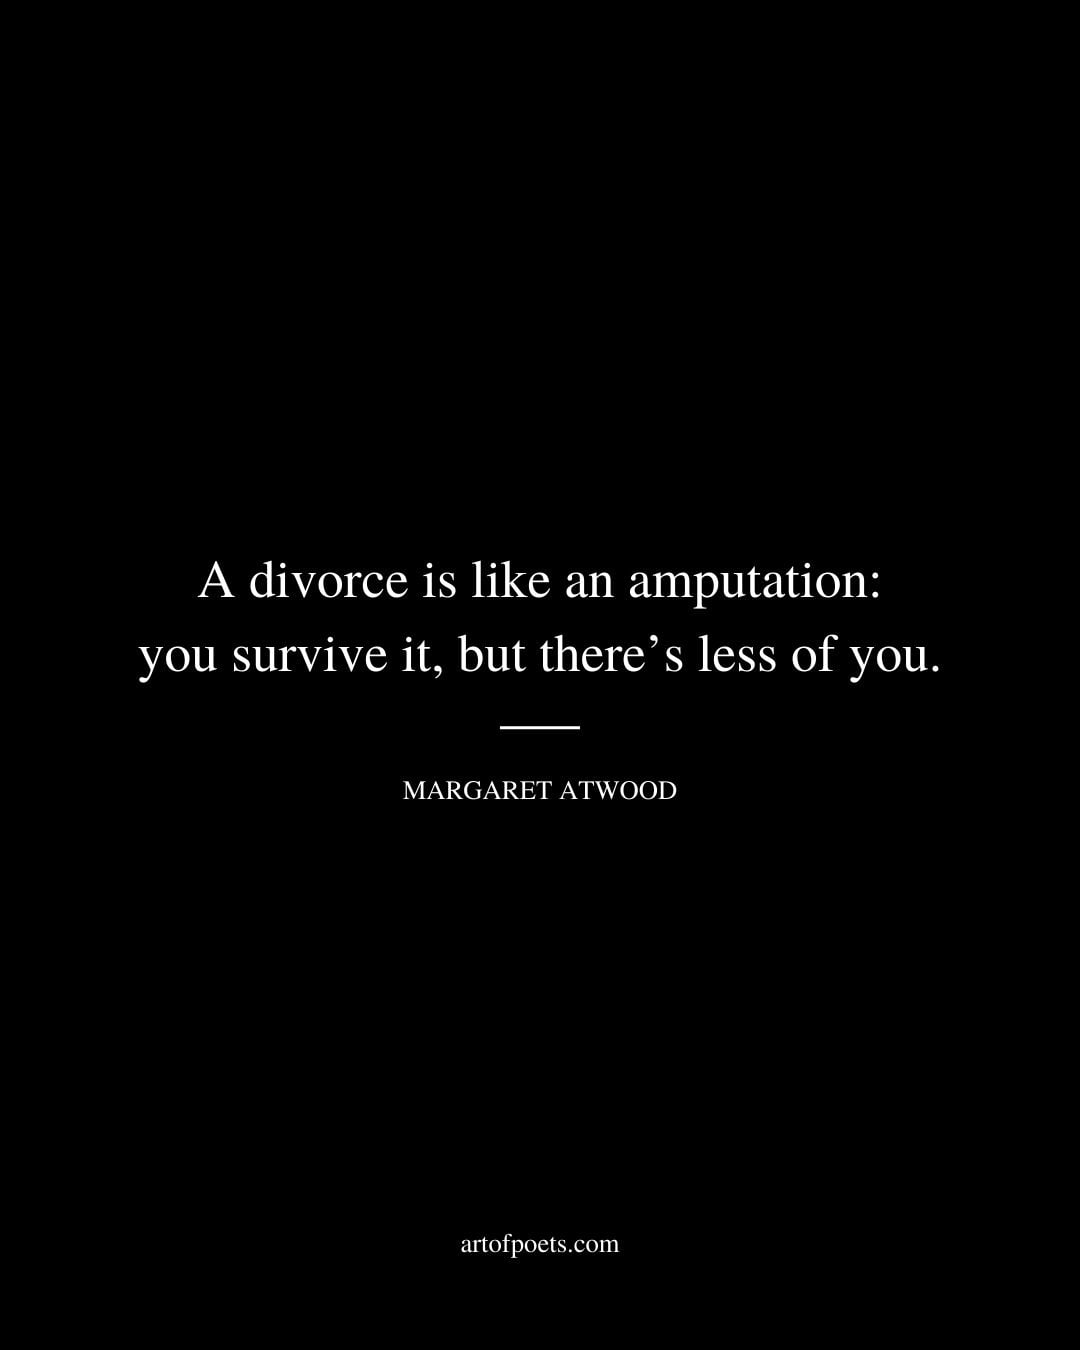 A divorce is like an amputation you survive it but theres less of you. Margaret Atwood